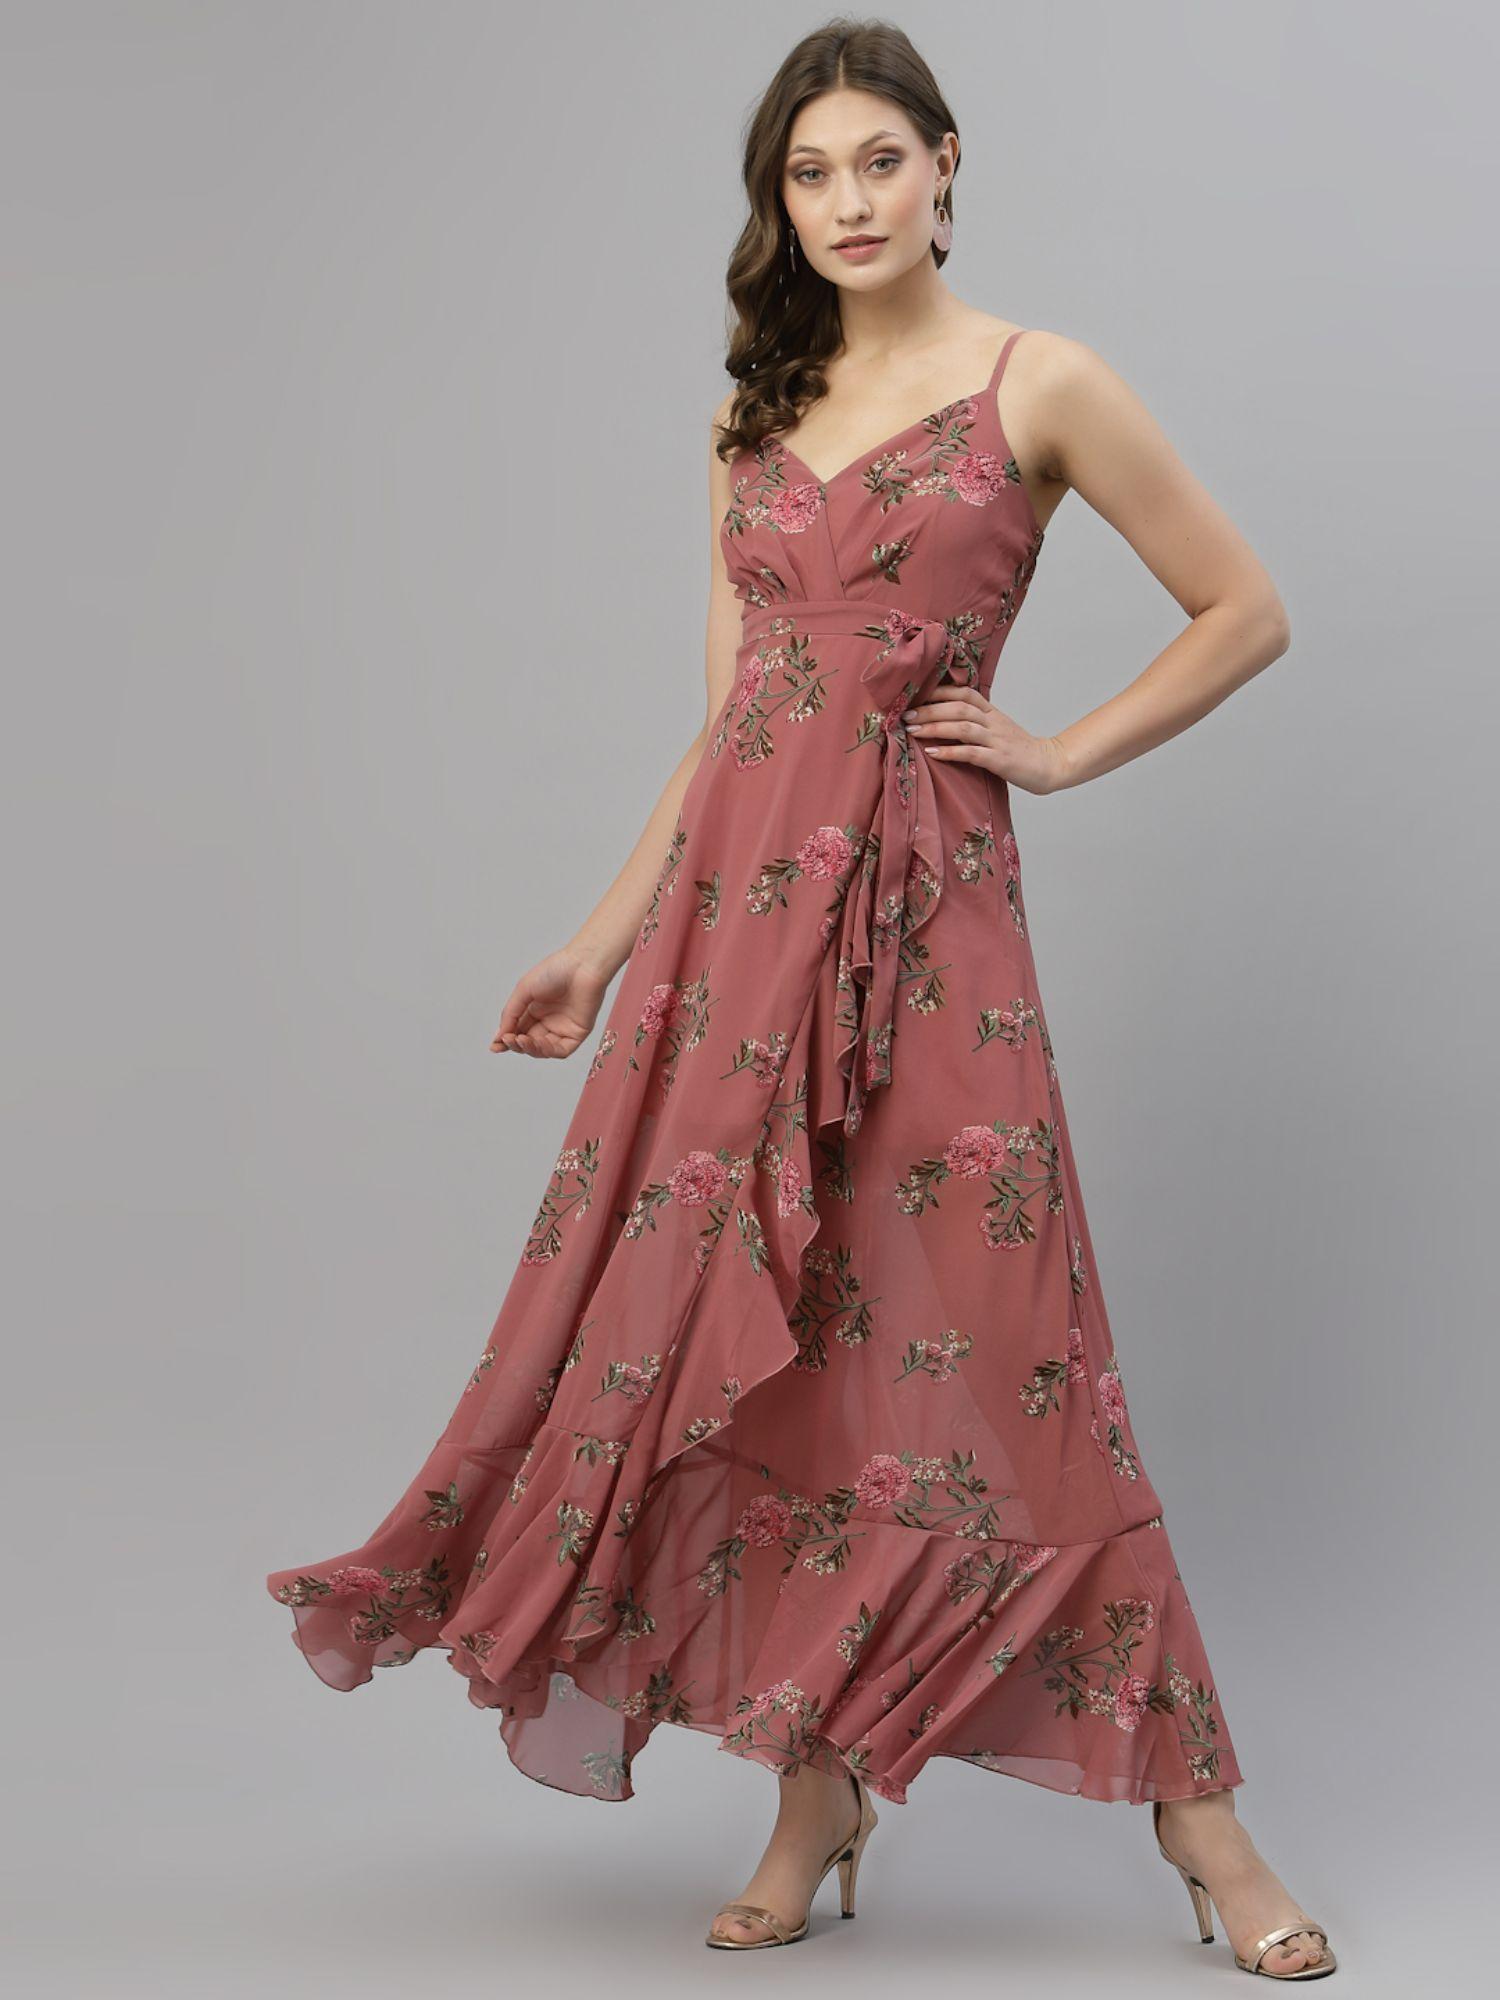 pink floral georgette ruffled maxi dress